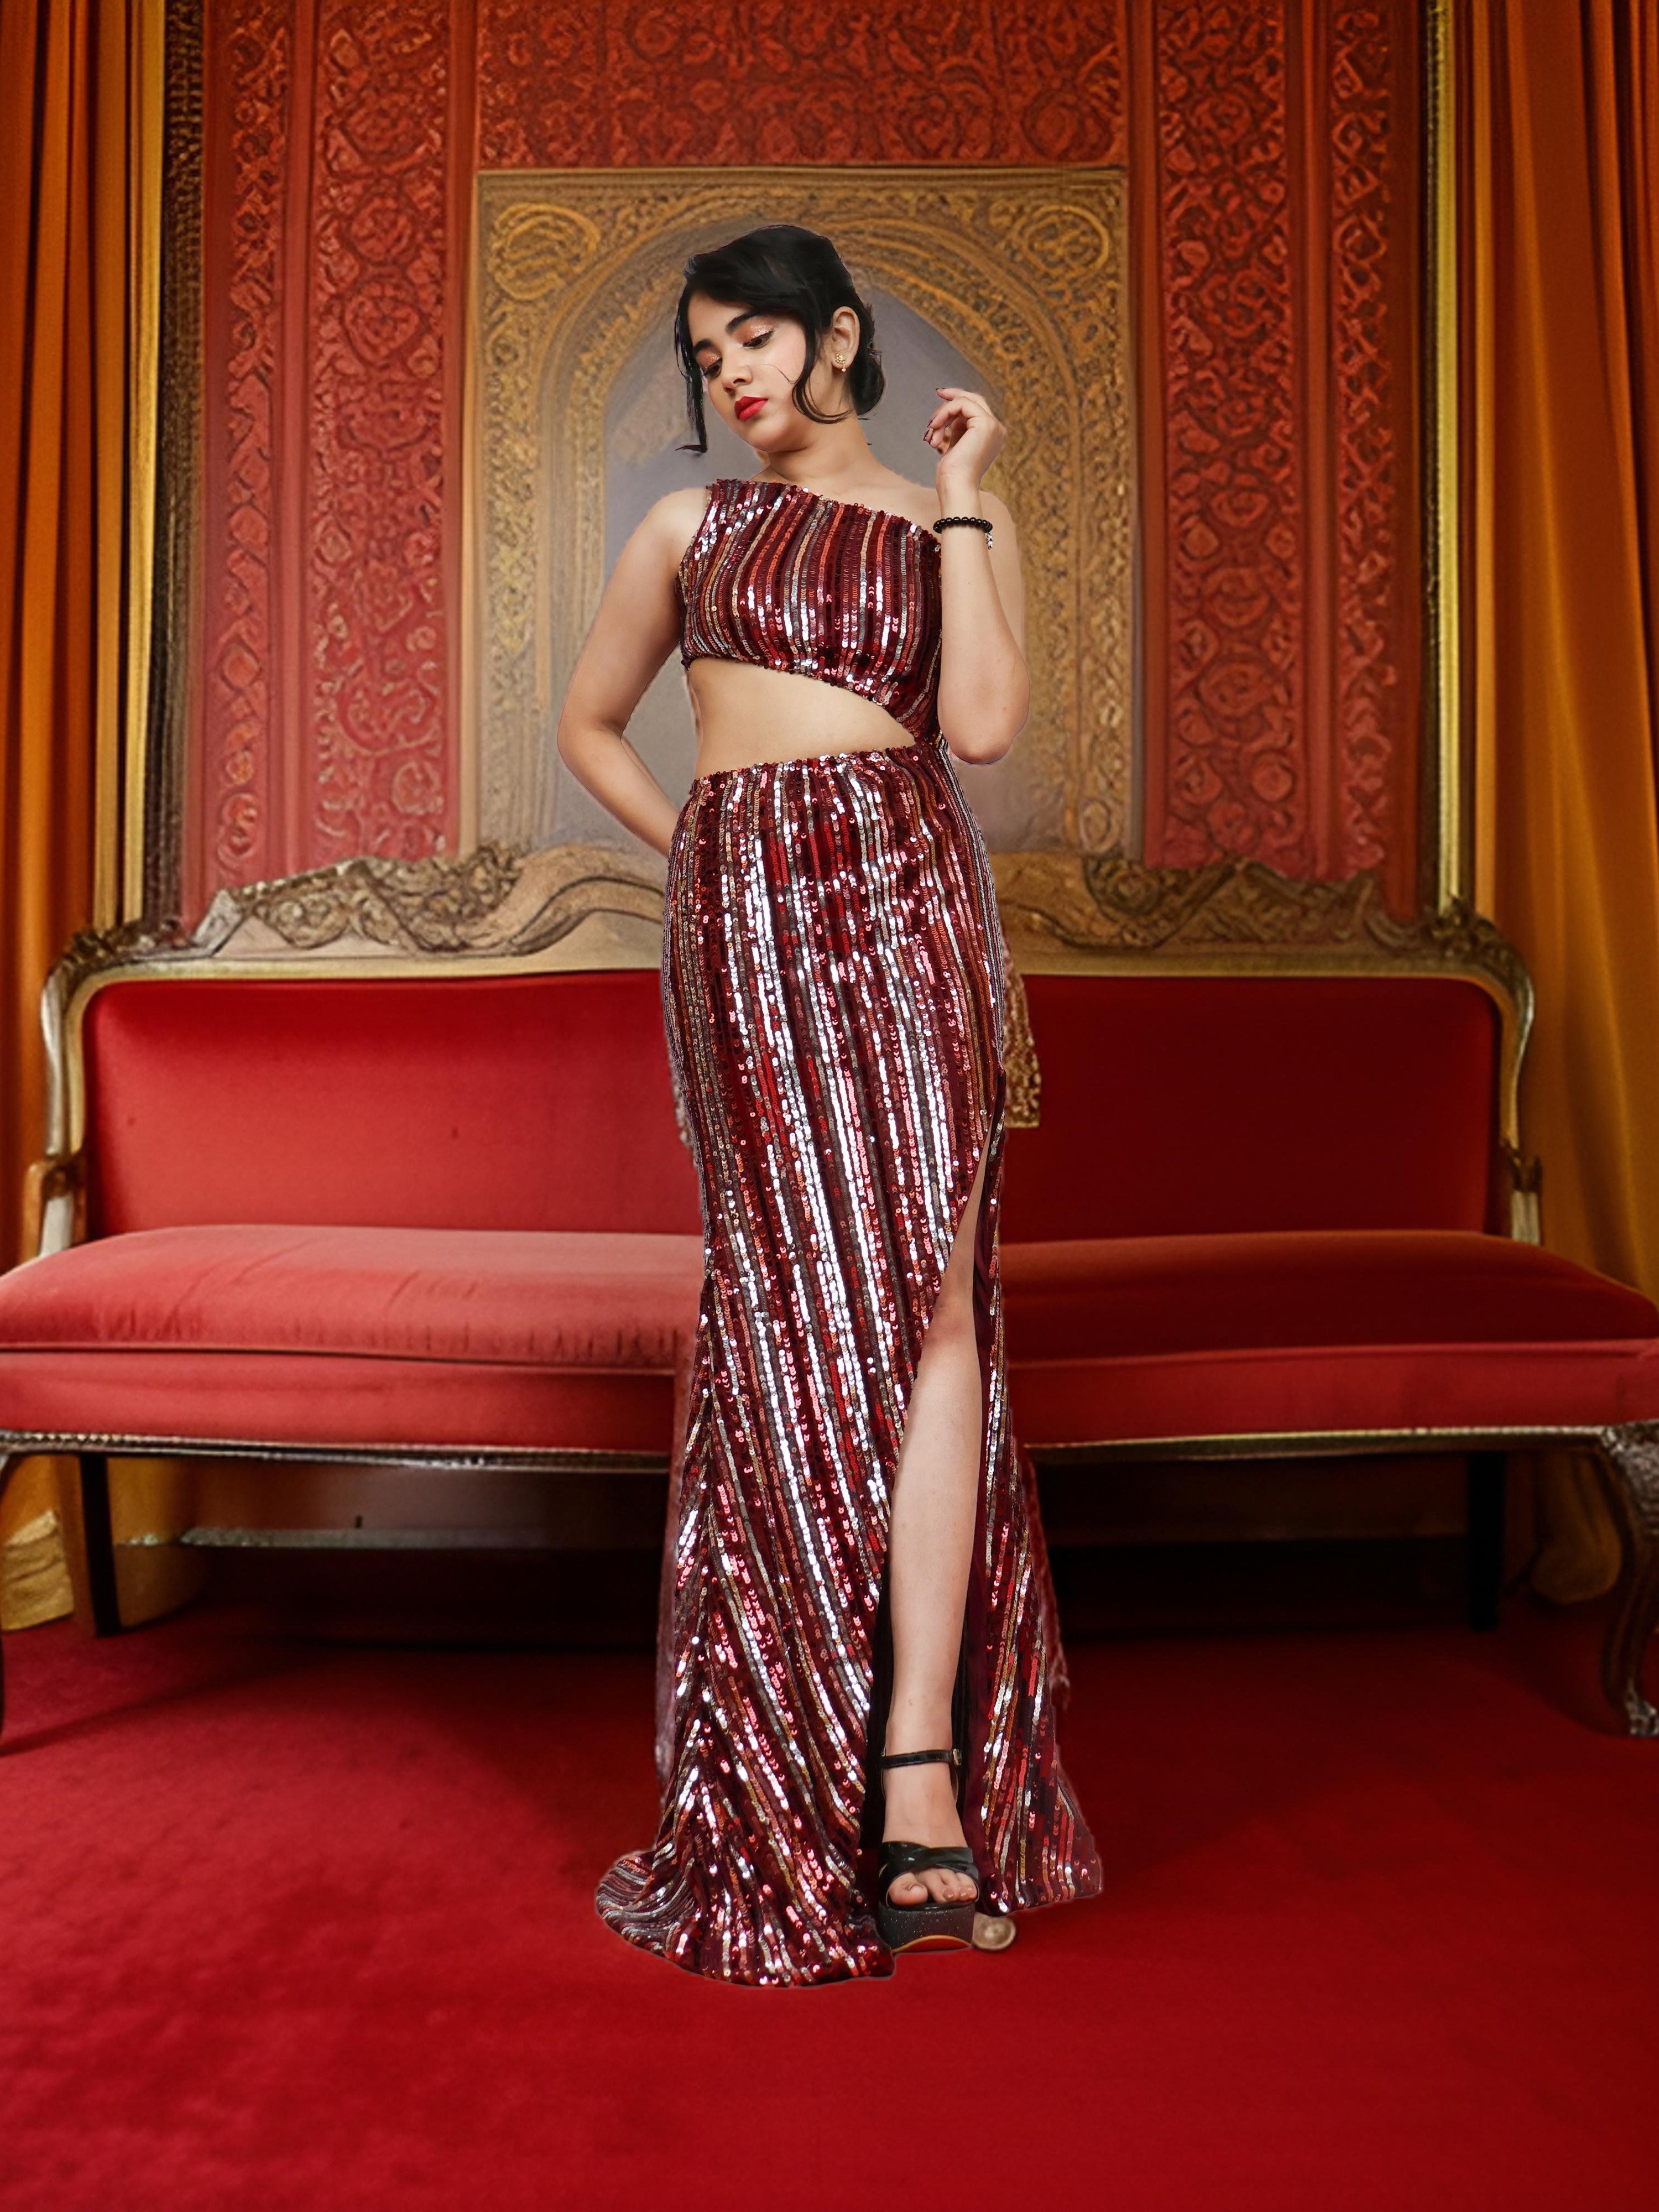 One-Shoulder Sequin Maxi Party Dress by Shreekama Maroon Dress for Party Festival Wedding Occasion in Noida